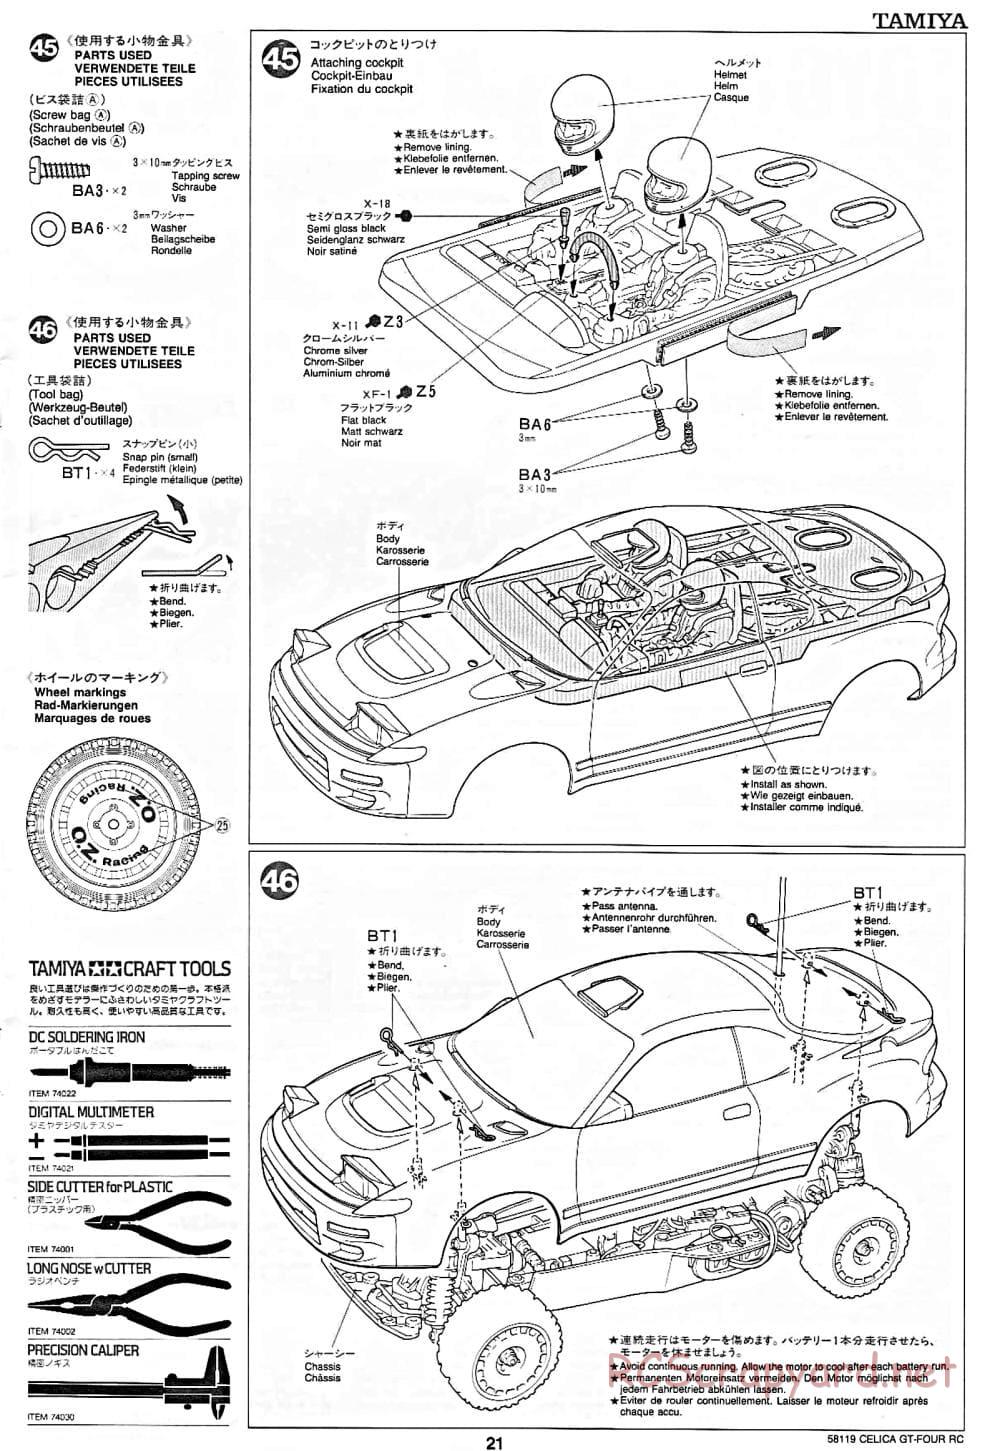 Tamiya - Toyota Celica GT-Four RC - TA-01 Chassis - Manual - Page 21